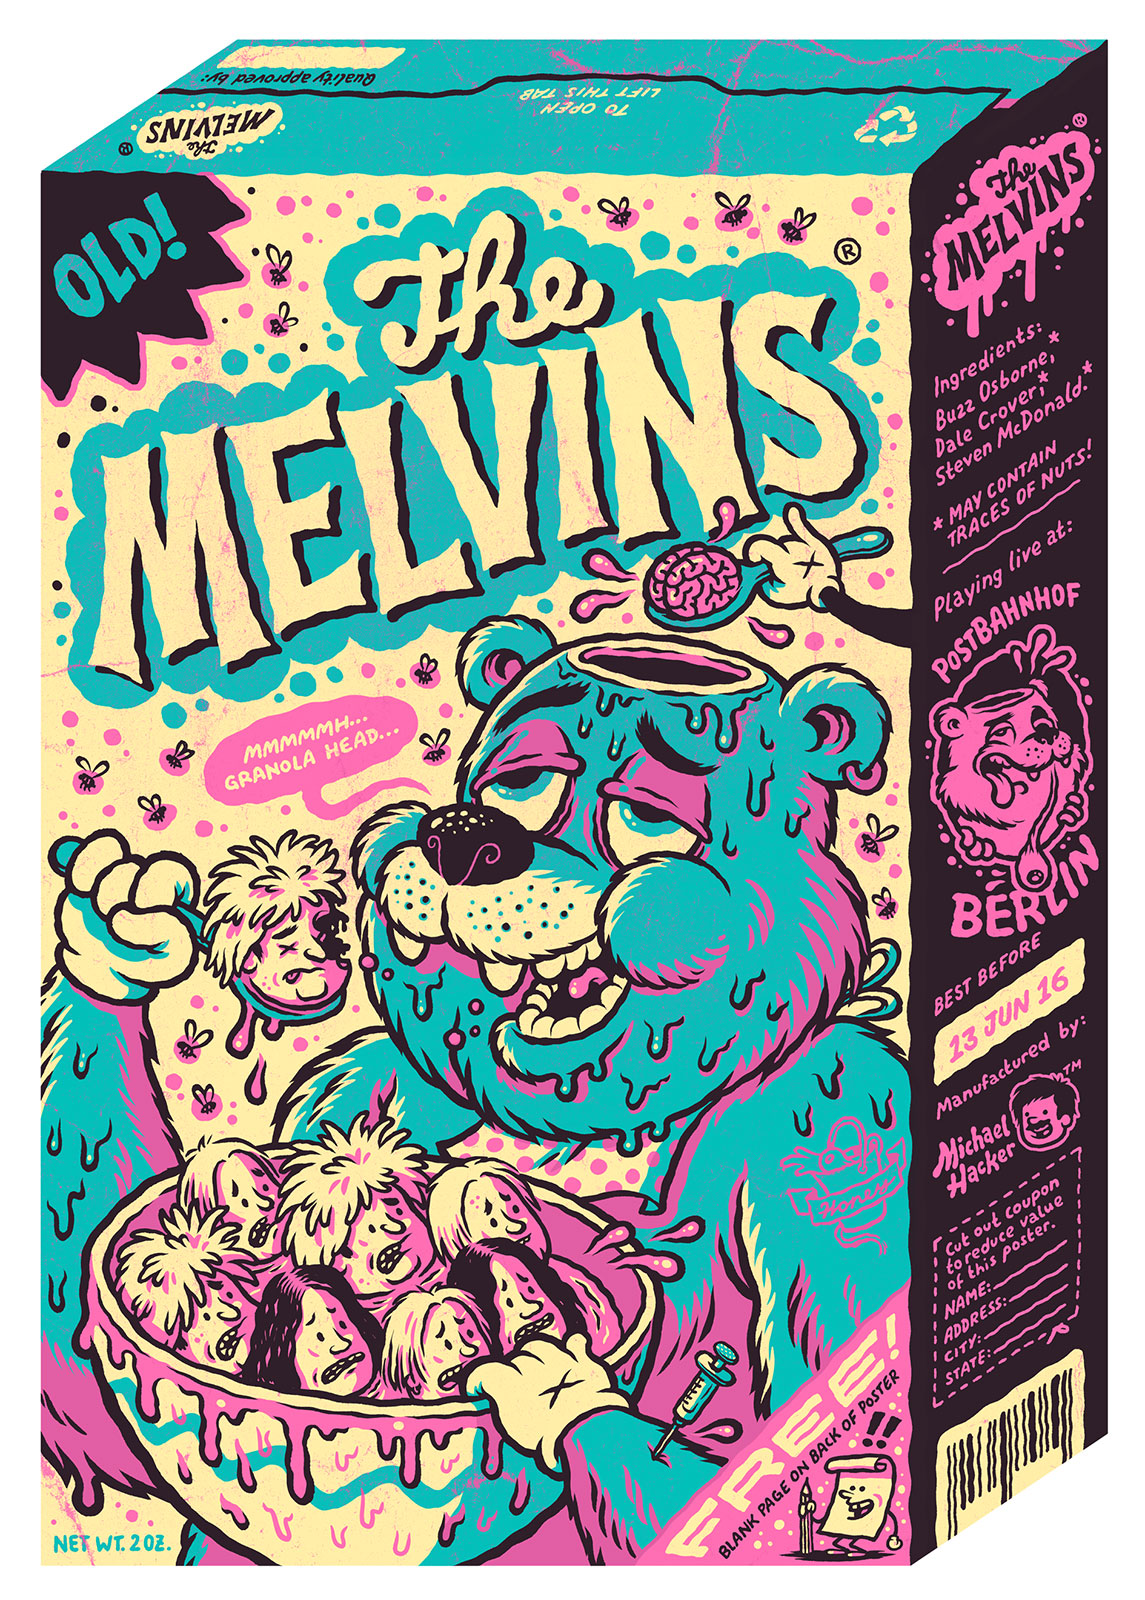 Melvins gigposter by Michael Hacker